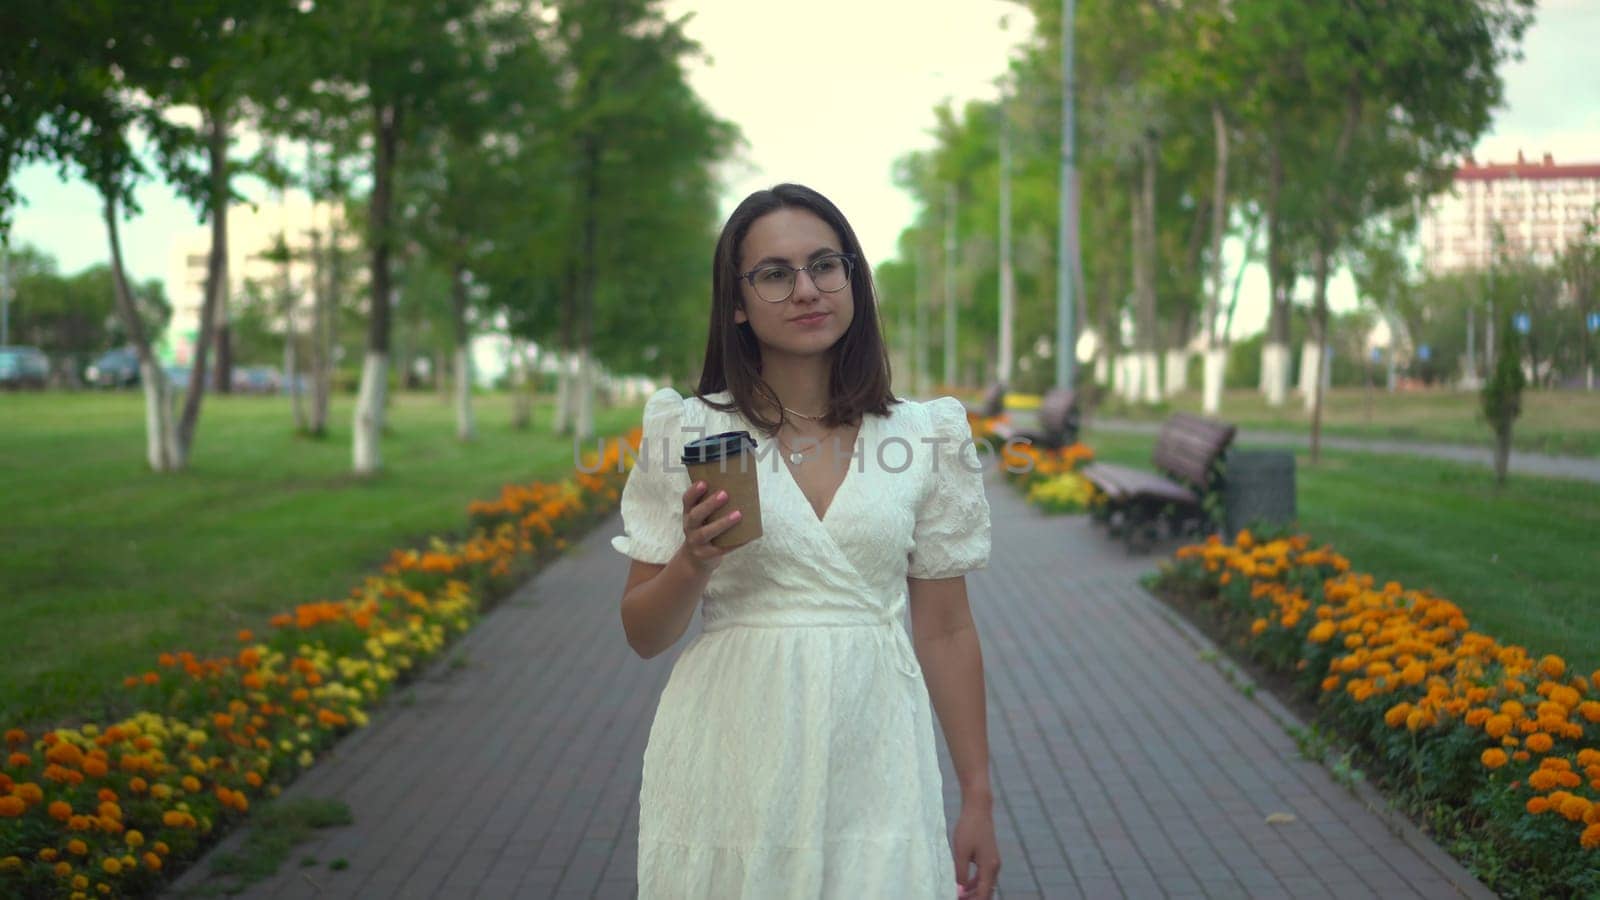 A young woman walks along an alley in a white dress and drinks crofe. A girl with glasses walks through the park with coffee in her hands. 4k